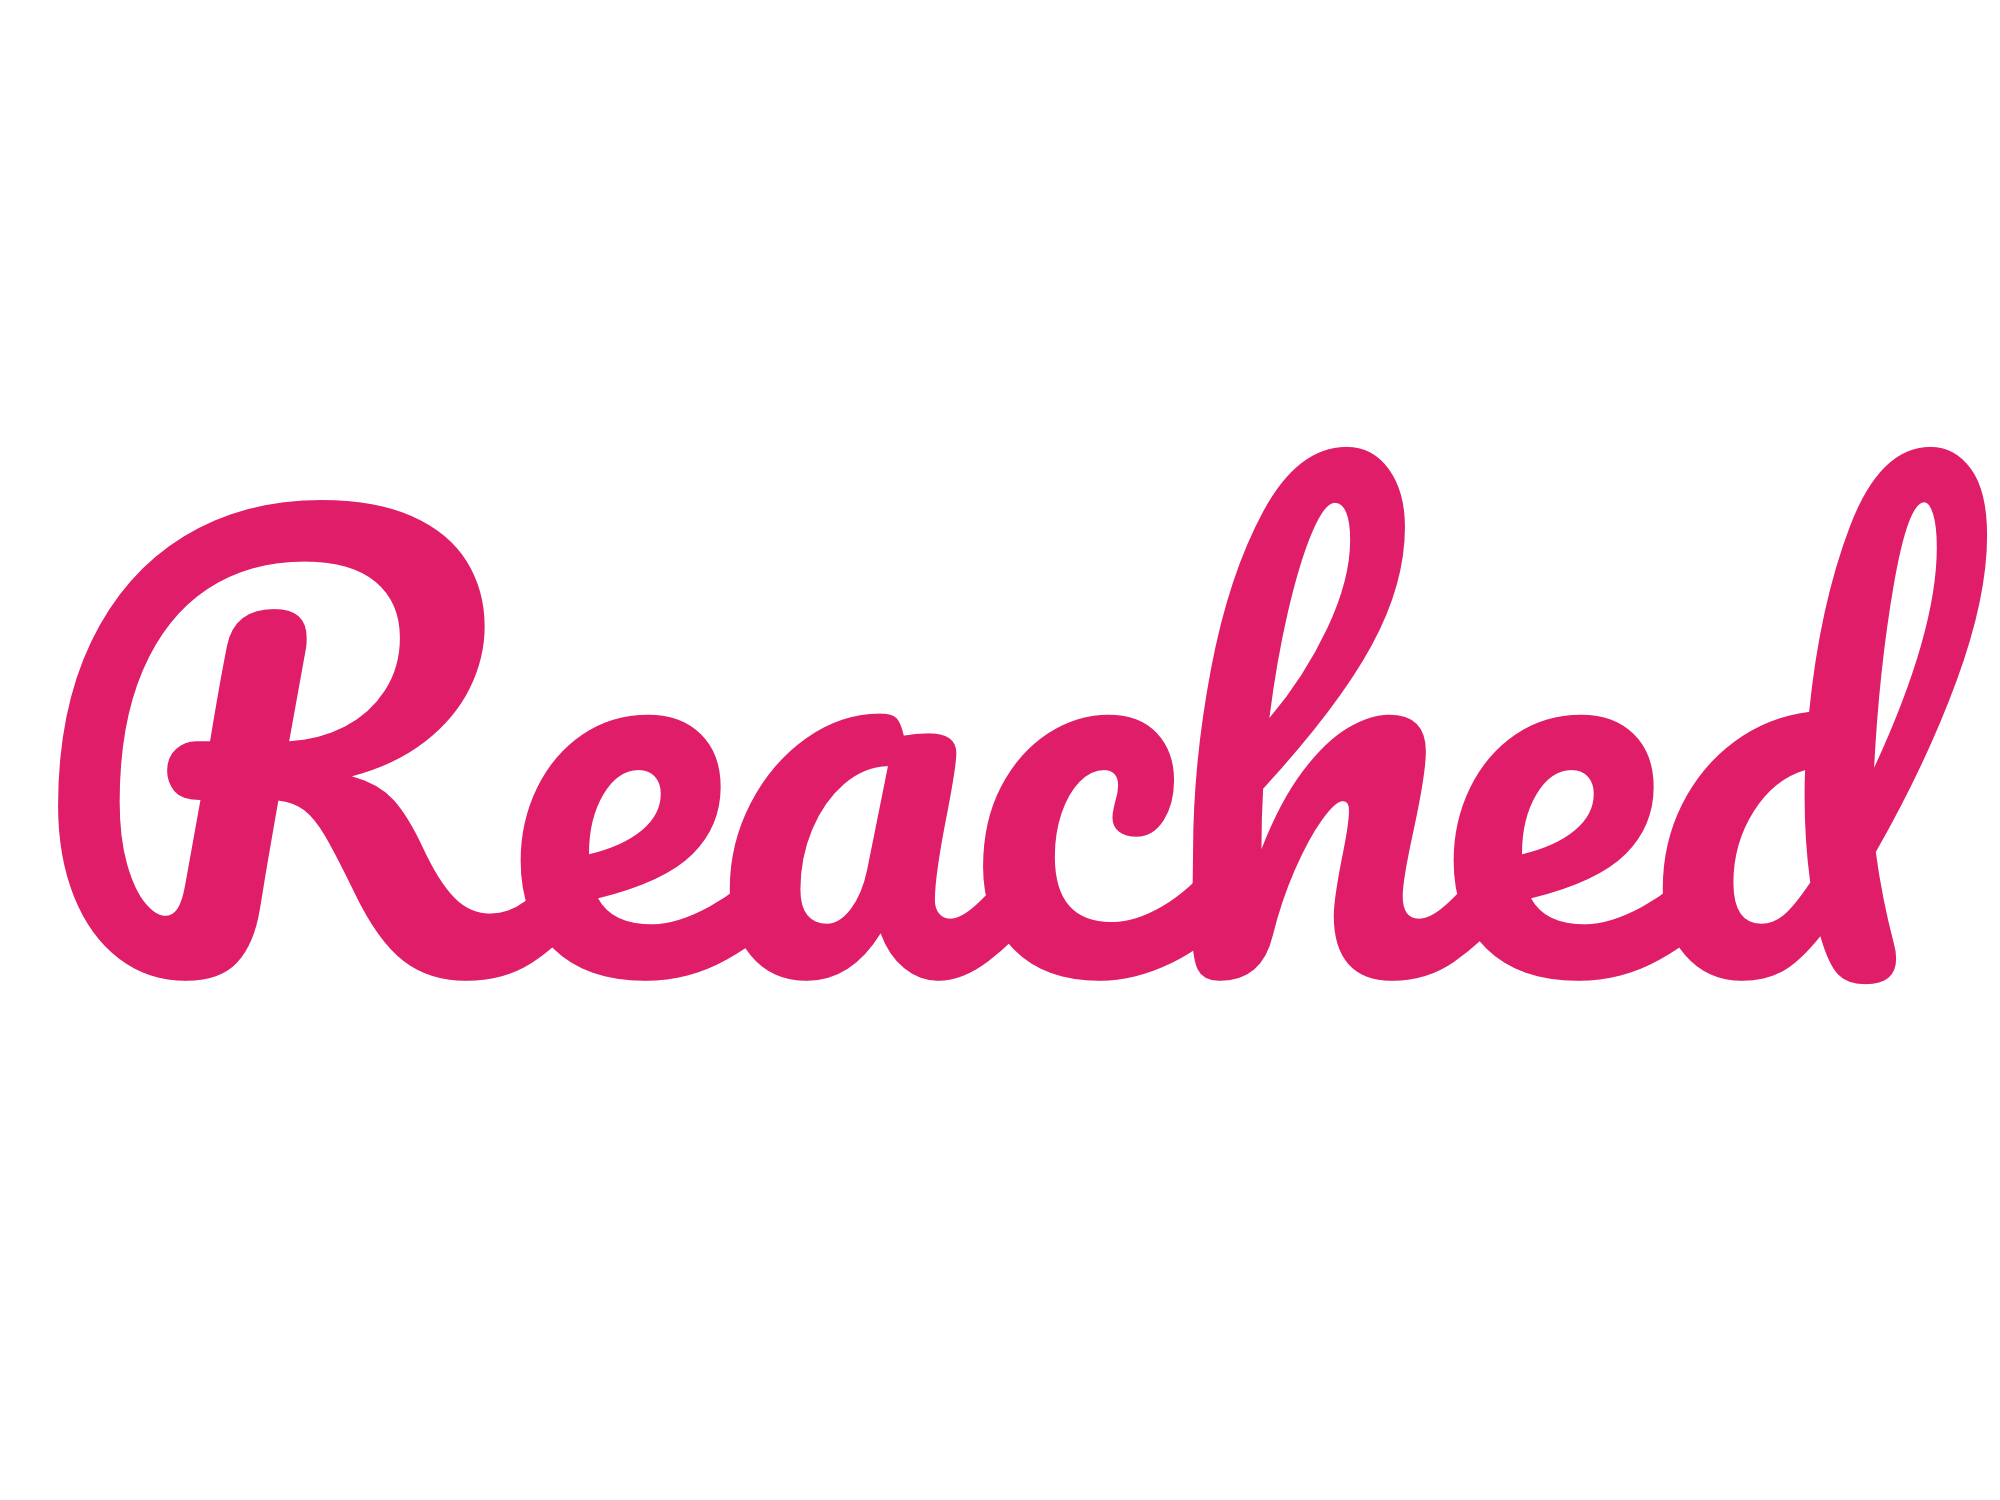 Reached Logo